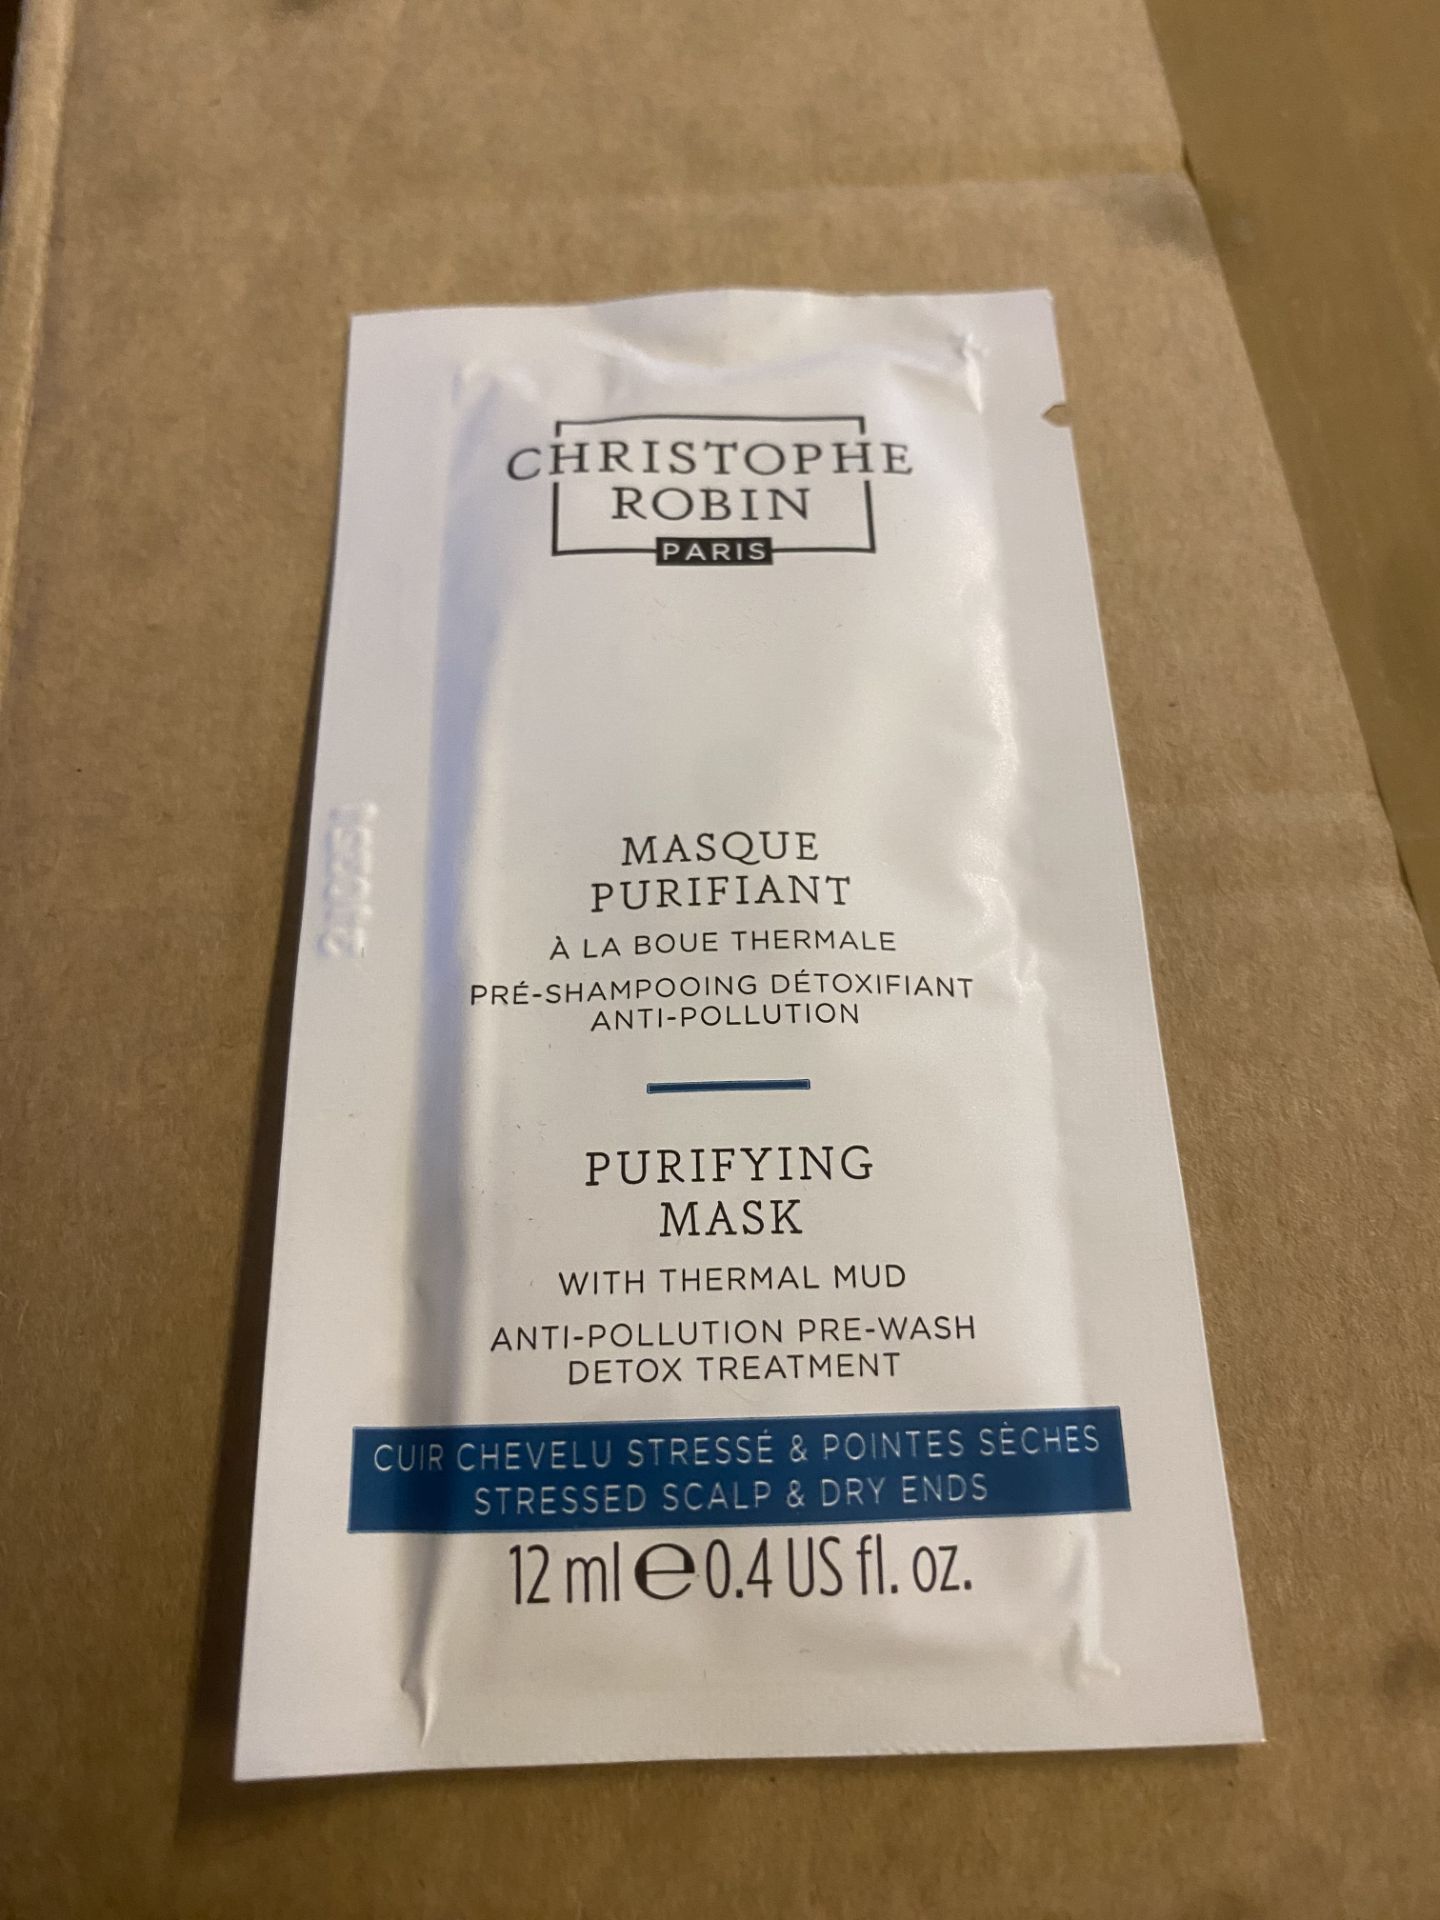 2000 X CHRISTOPHE ROBIN PURIFYING MASK WITH THERMAL MUD 12ML SACHETS RRP£3800 - Image 2 of 3